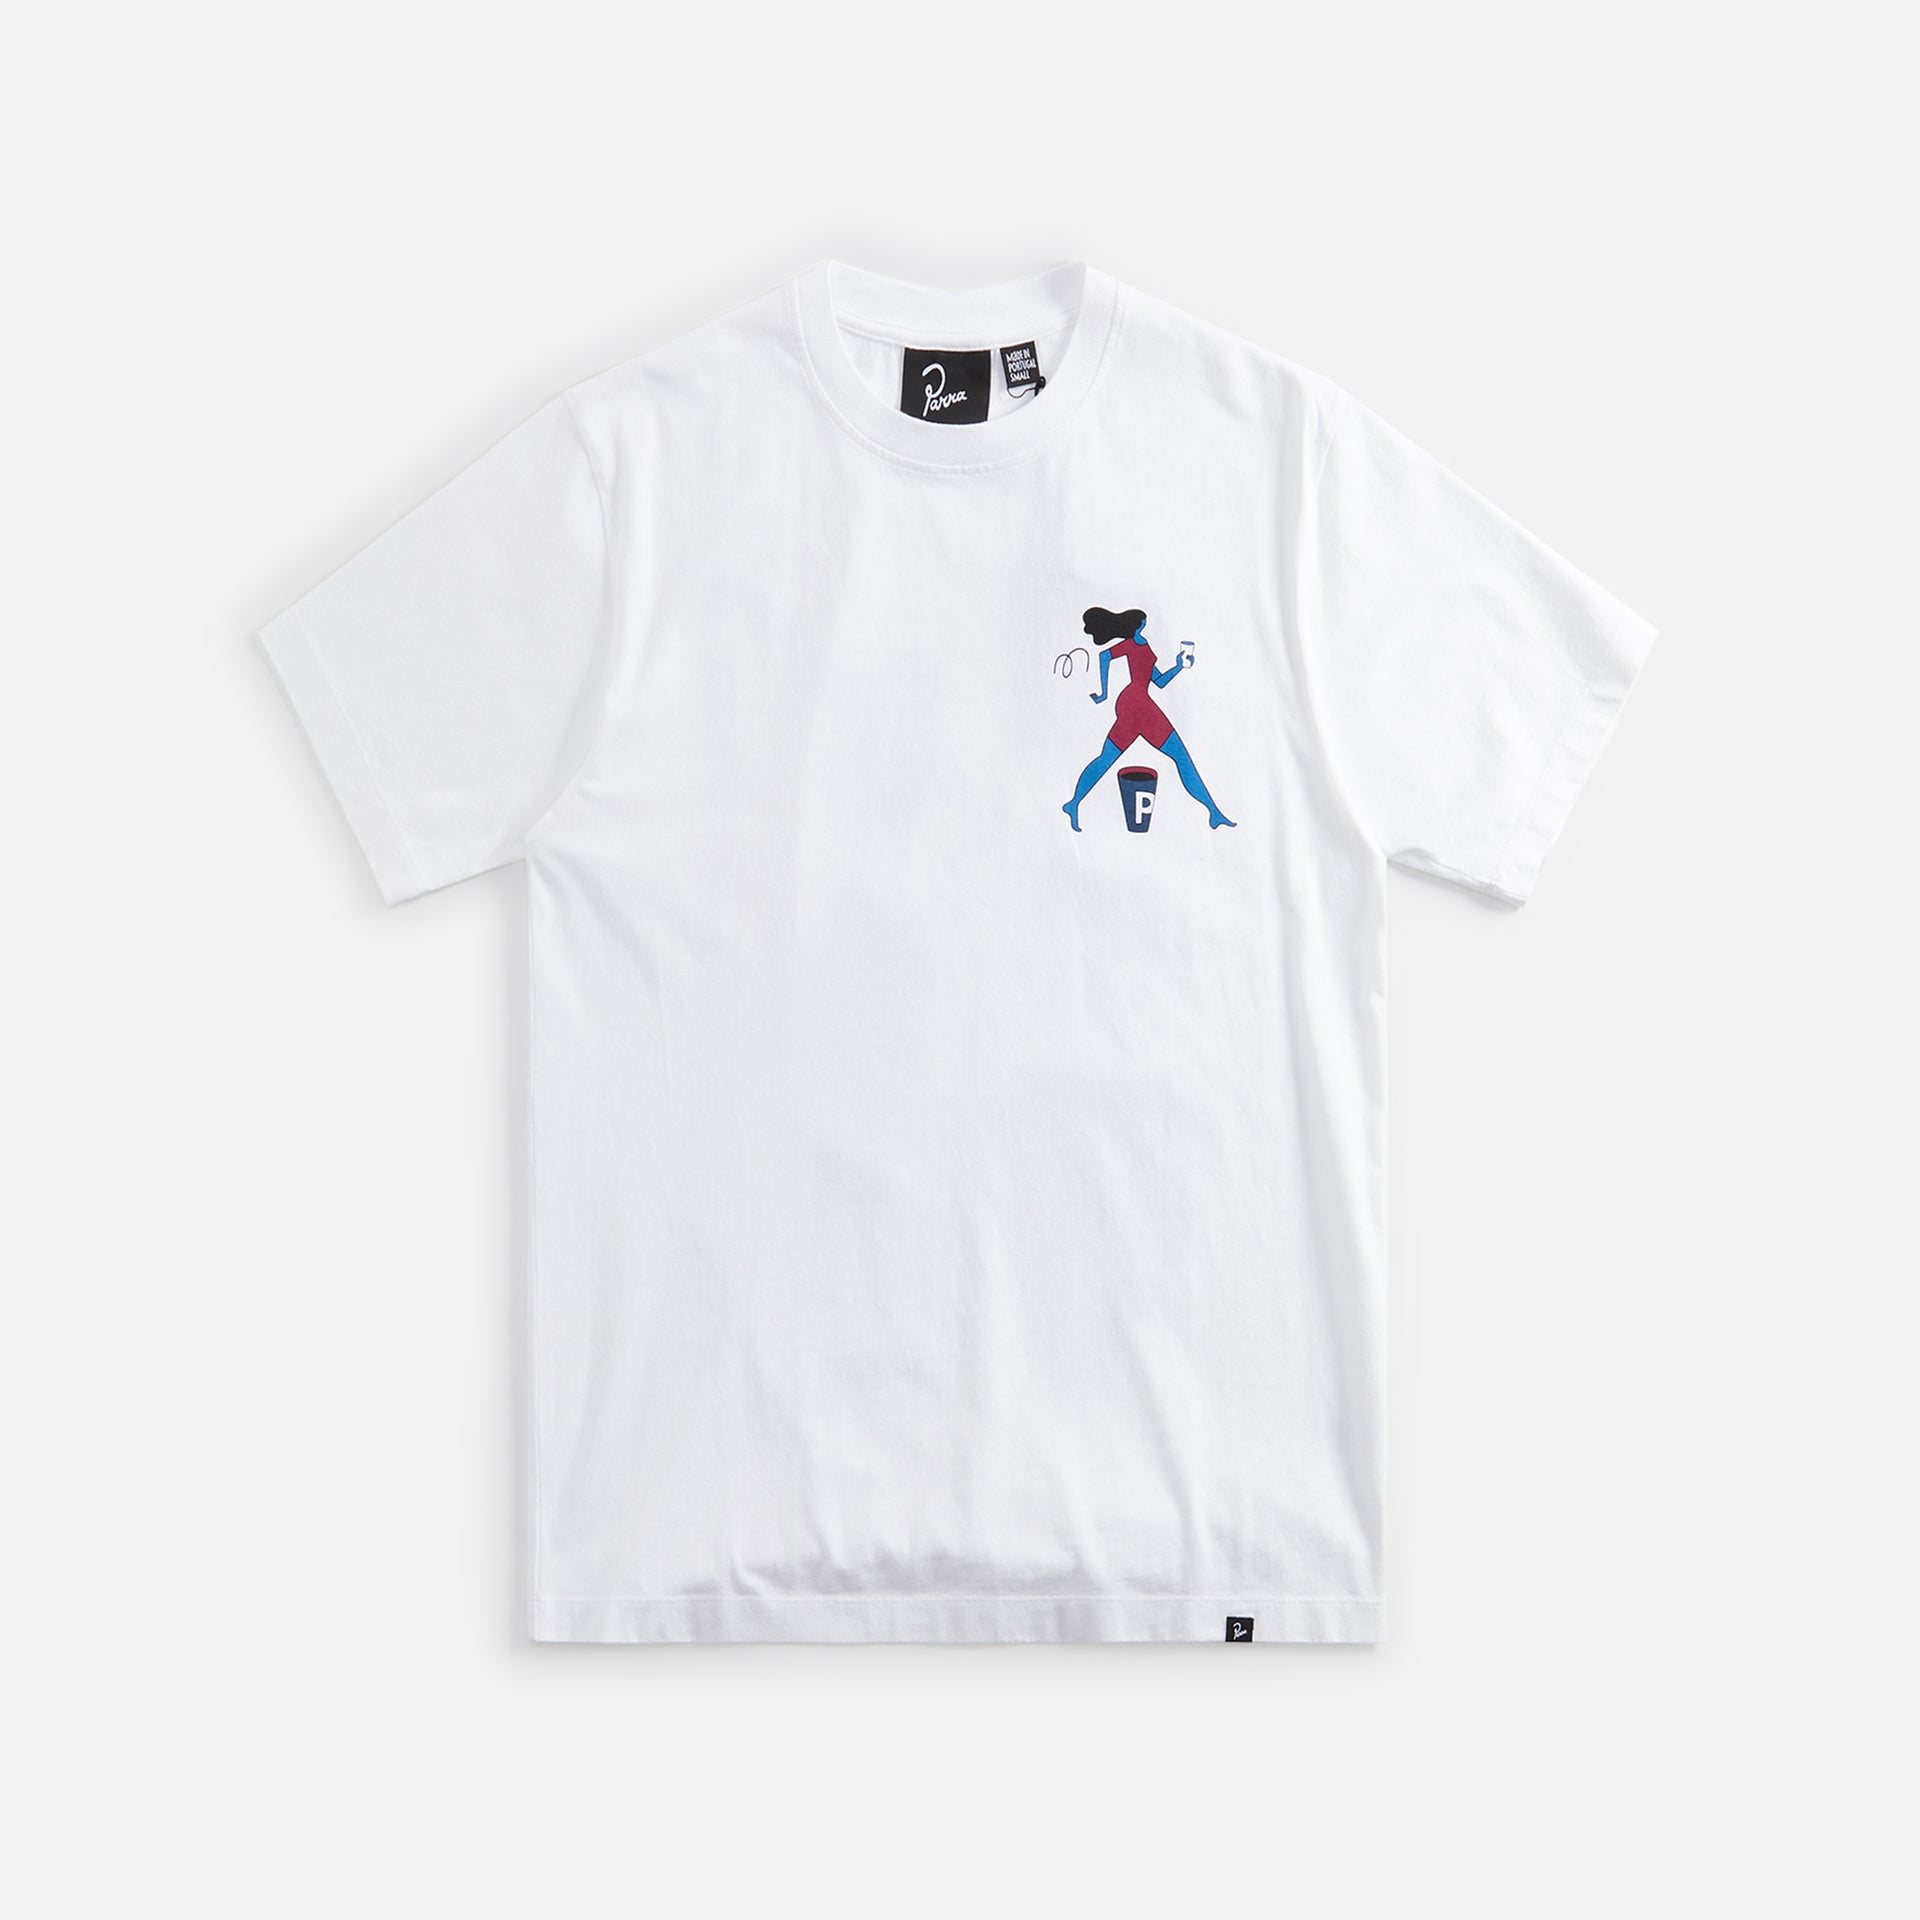 by Parra Questioning Tee - Warm Grey